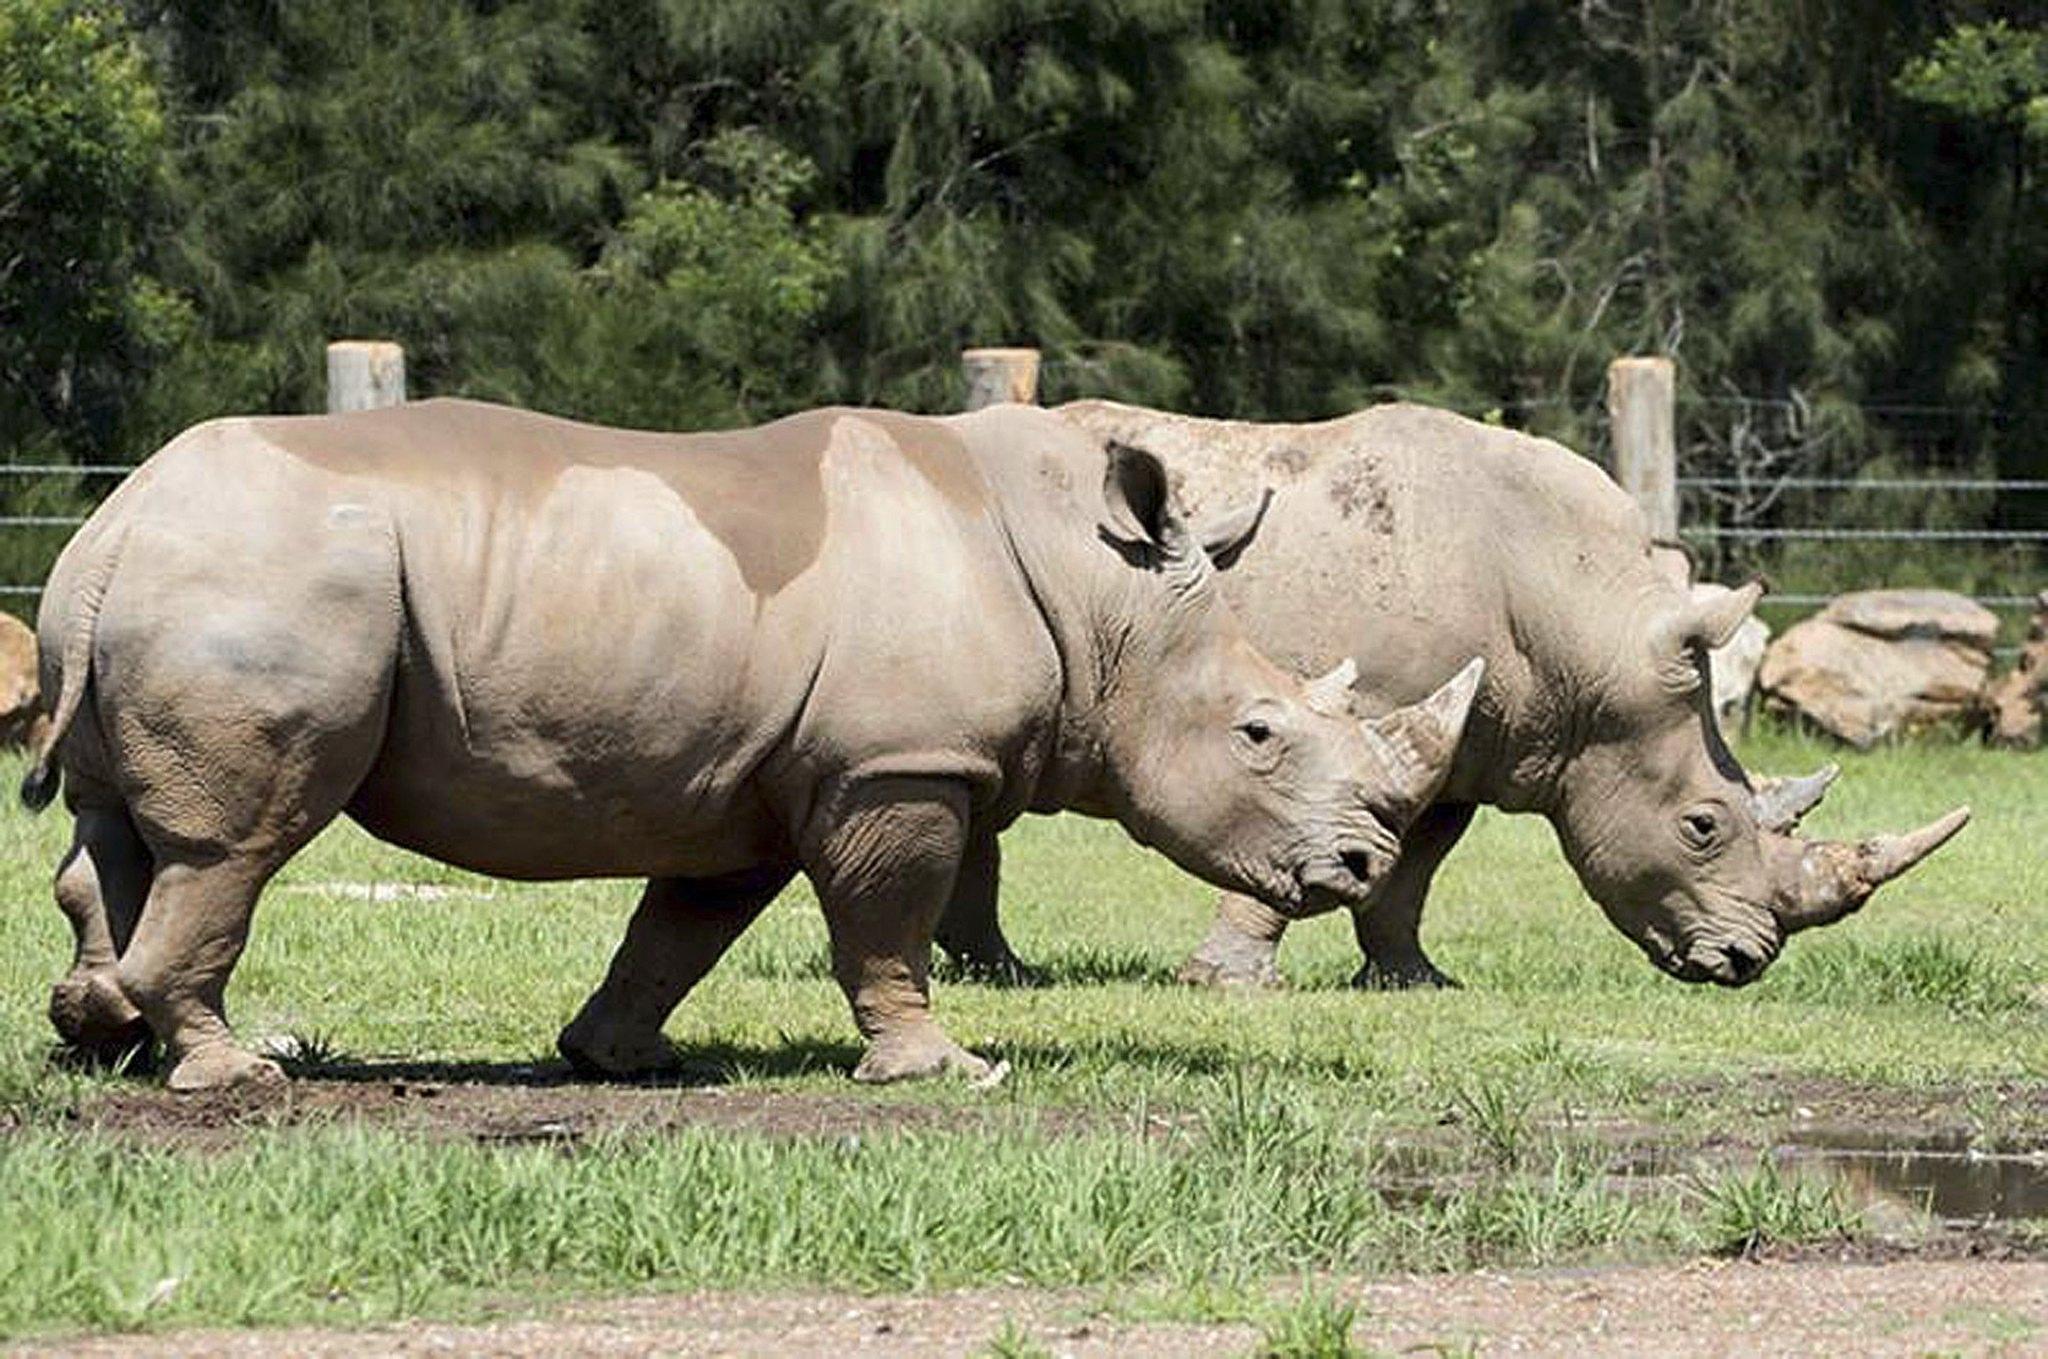 epa06414028 An undated handout photo made available by Mogo Zoo on 03 January 2018 shows Kei, a male southern white rhino at Mogo Zoo, south of Batemans Bay, New South Wales, Australia. A 47-year-old senior zookeeper suffered a serious arm wound on 02 January 2018, after she was reportedly gored by Kei, a southern white rhino, at Mogo Zoo south of Batemans Bay, according to media reports. The woman was completing a routine procedure when she was injured, Mogo Zoo said in a statement.  EPA/MOGO ZOO HANDOUT -- BEST QUALITY AVAILABLE -- AUSTRALIA AND NEW ZEALAND OUT HANDOUT EDITORIAL USE ONLY/NO SALES